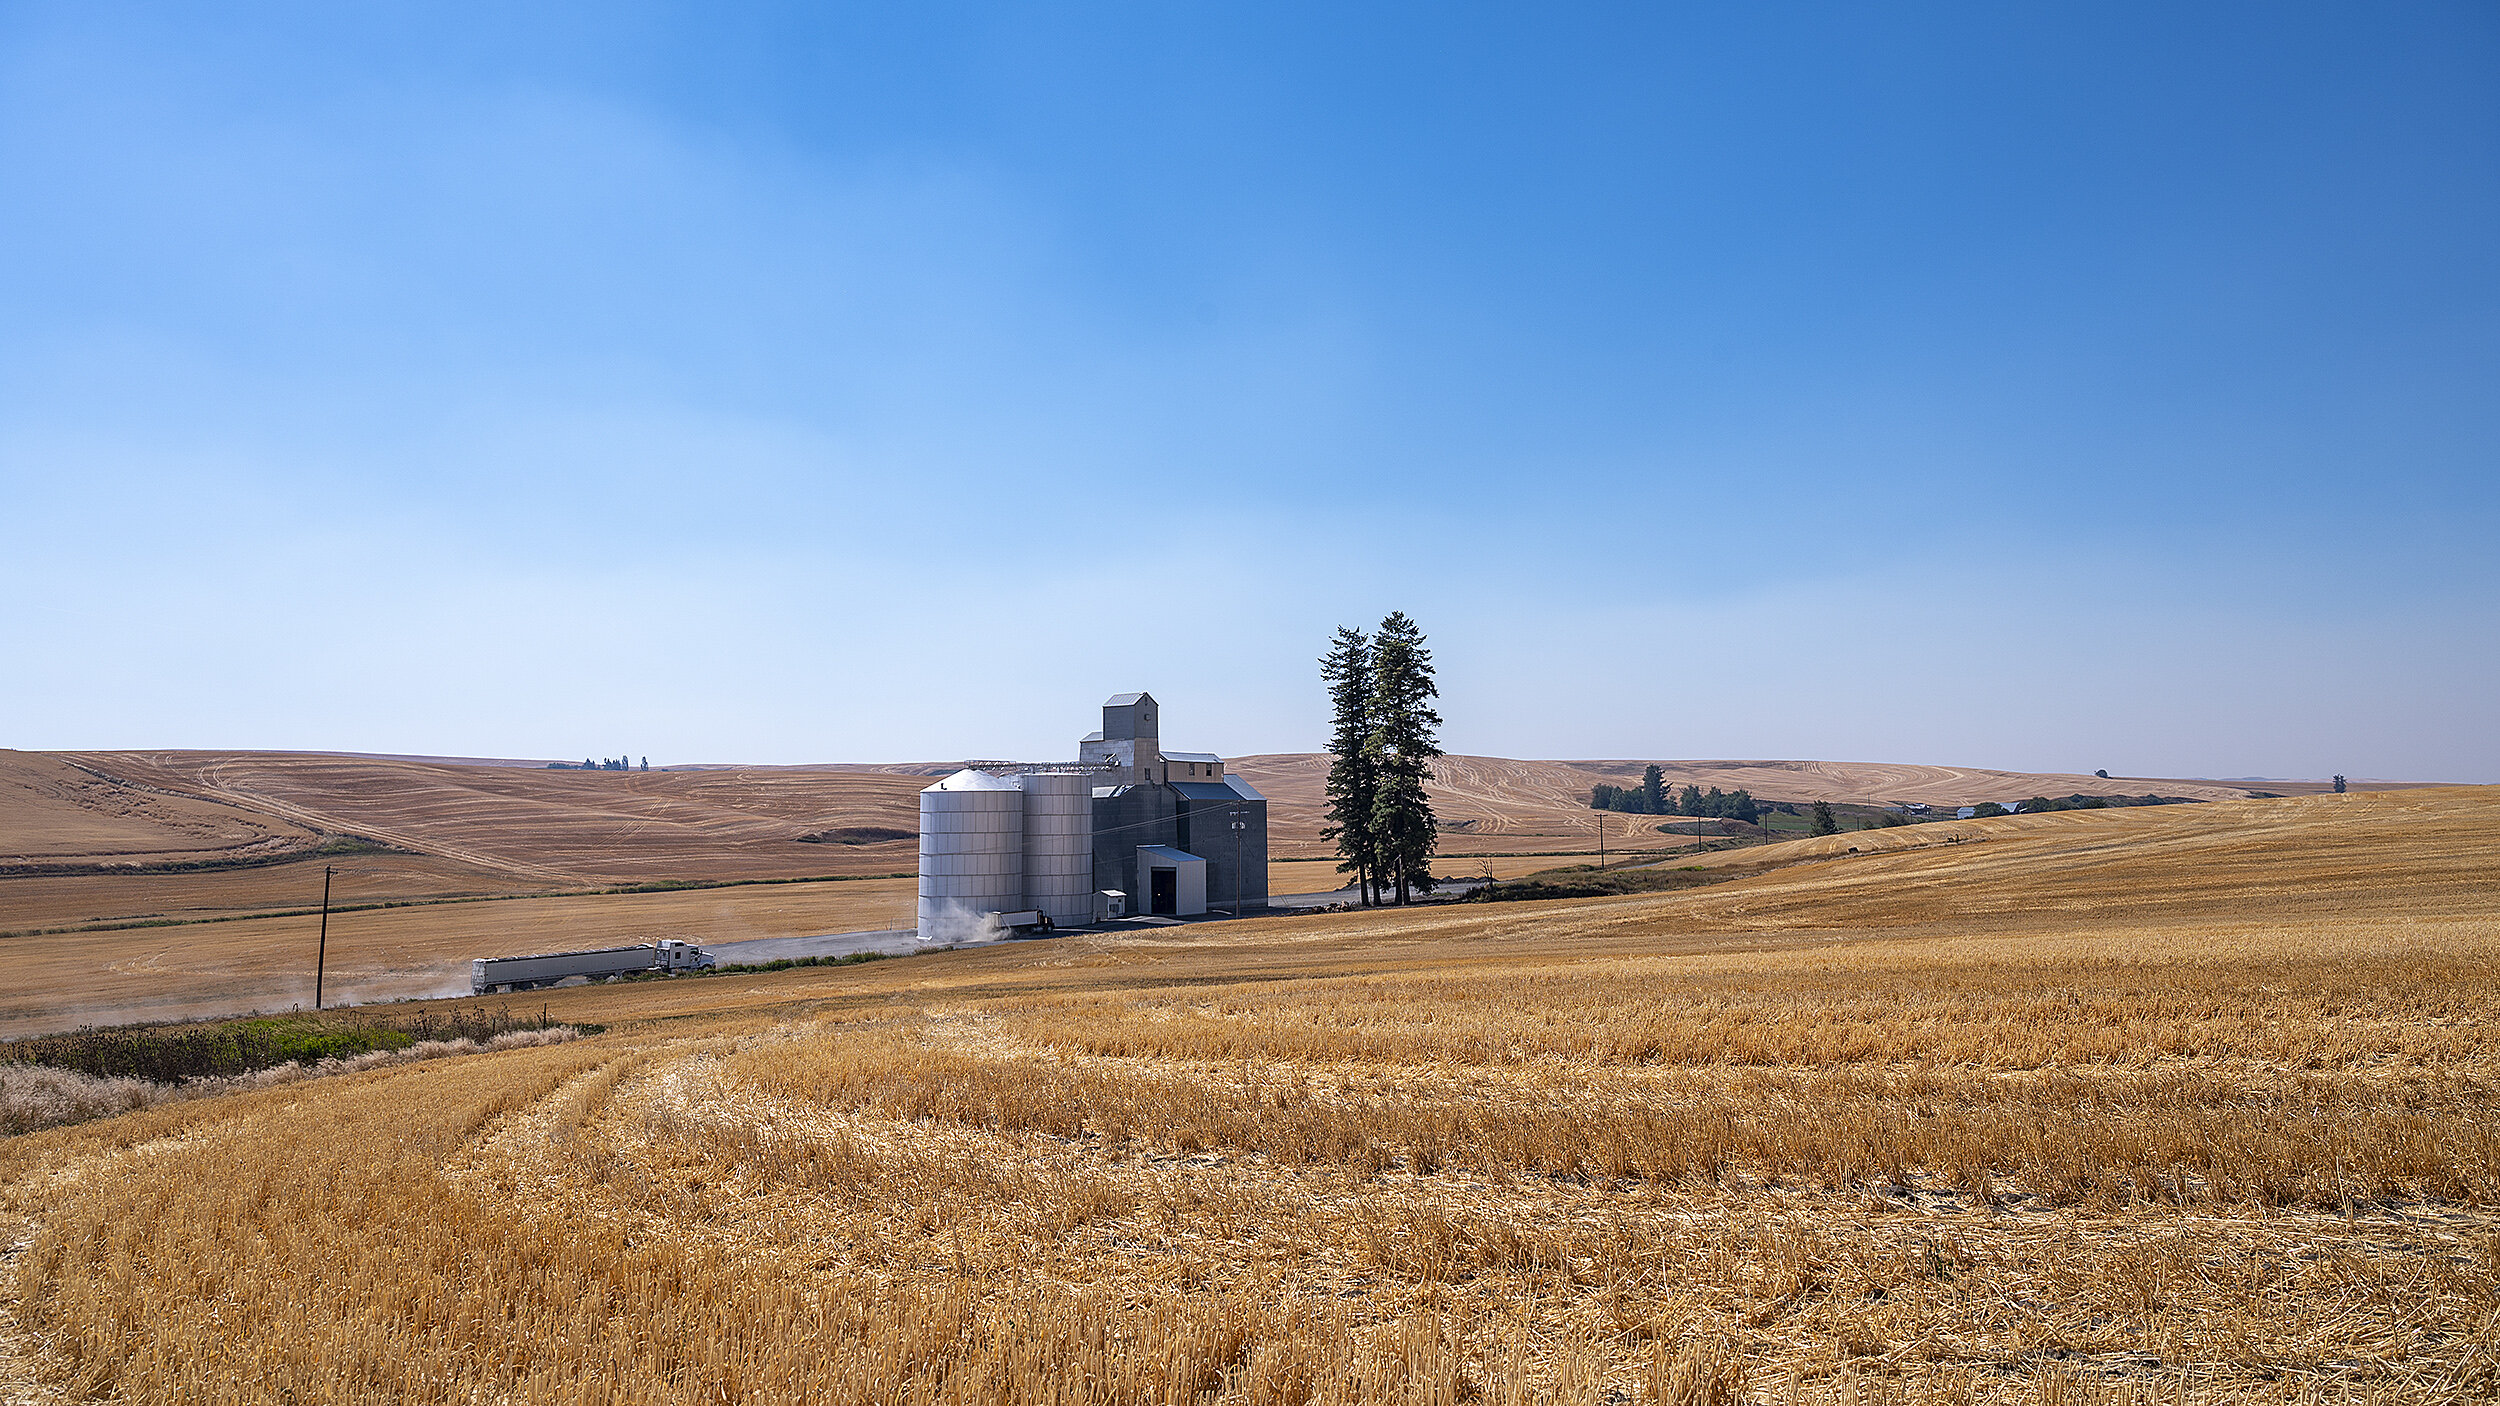  Almost like Alcatraz, the Leon Elevator sits alone in a sea of grain practically spitting distance from the Washington-Idaho border. Warehouseman Tony Egland works the station all by himself during harvest. But, by no means is it a jail sentence, he